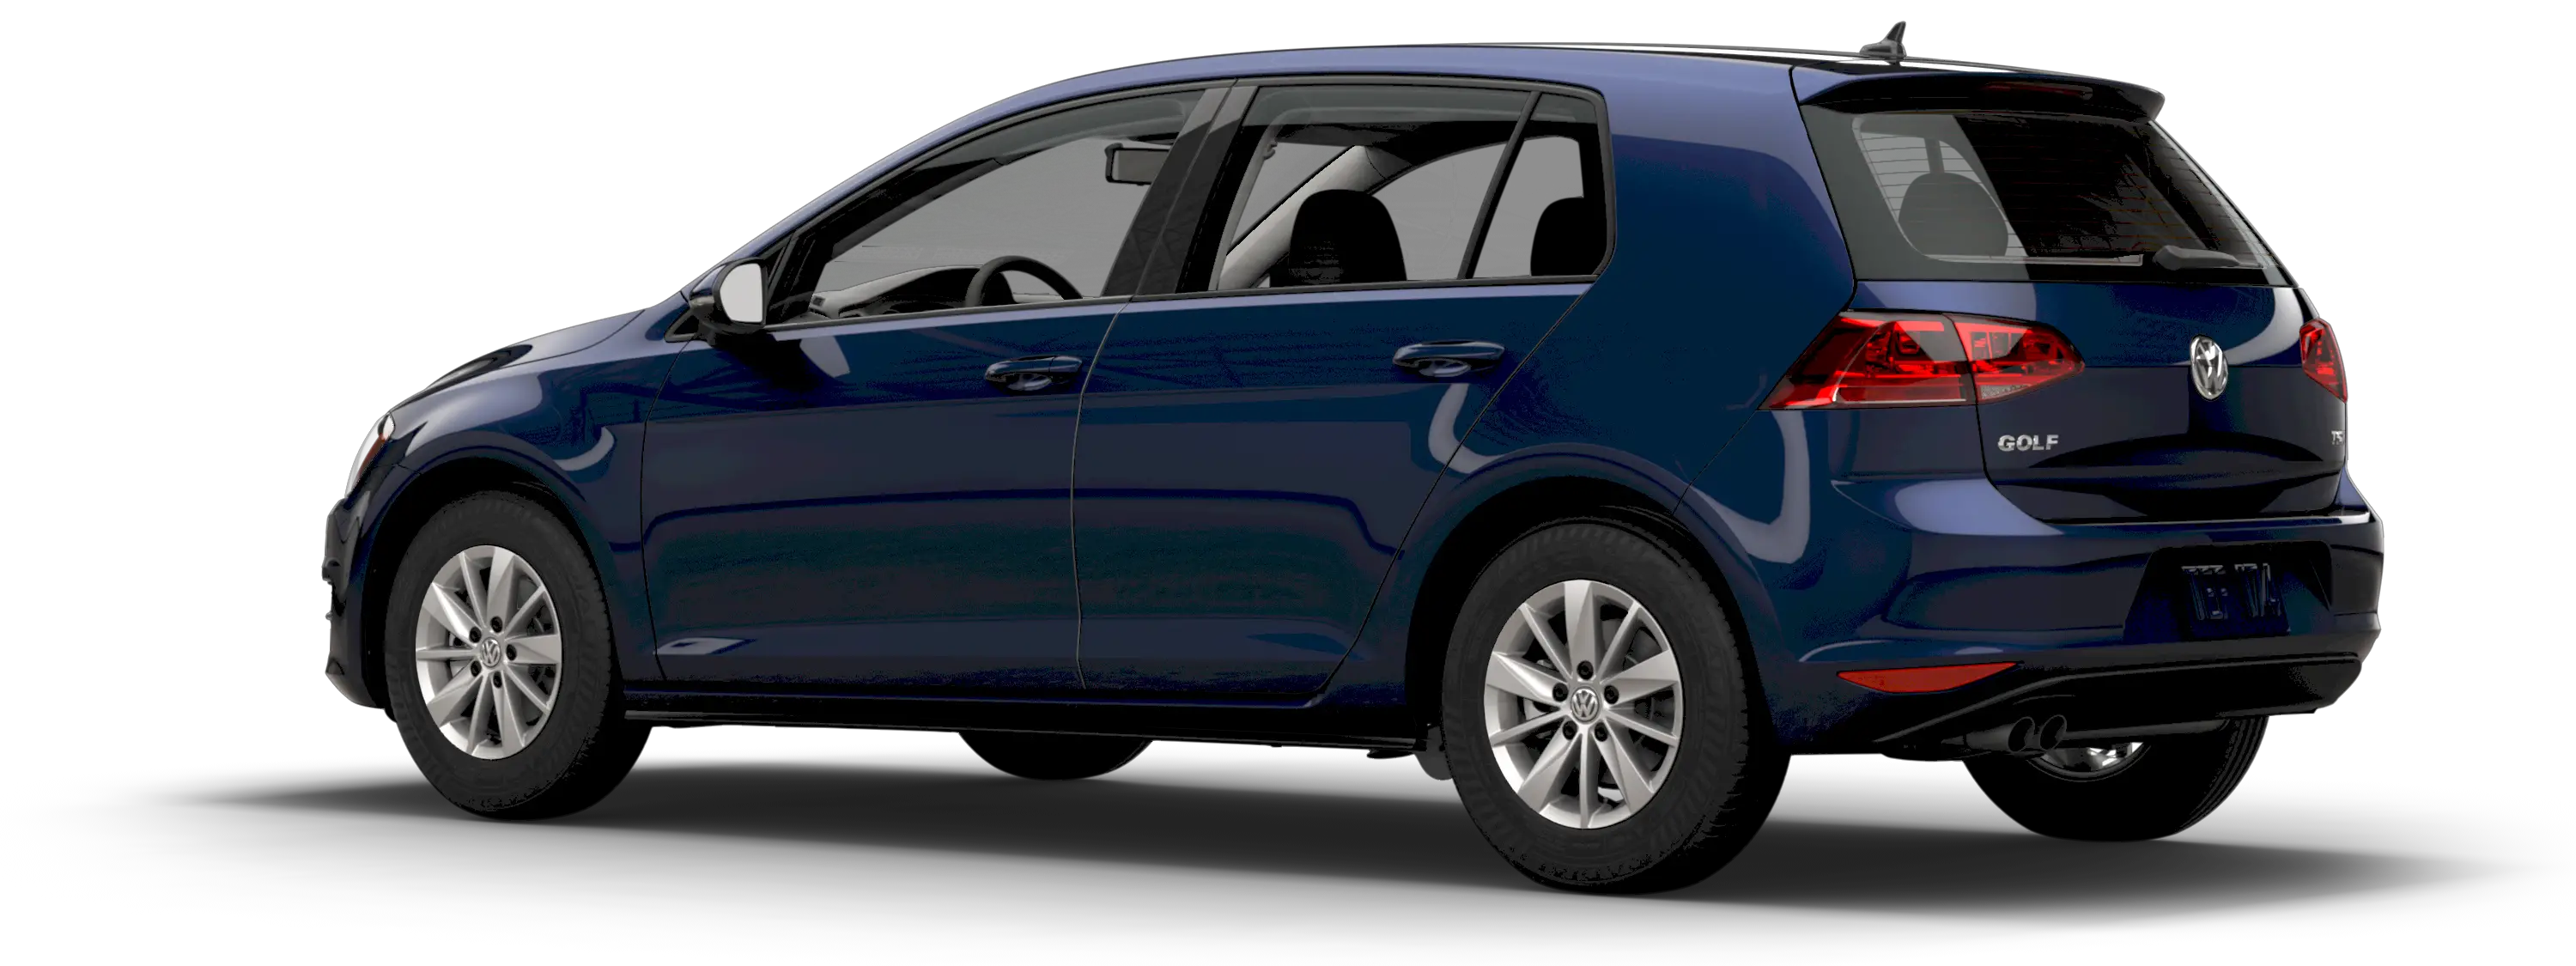 Volkswagen Golf S With Sunroof rear cross view